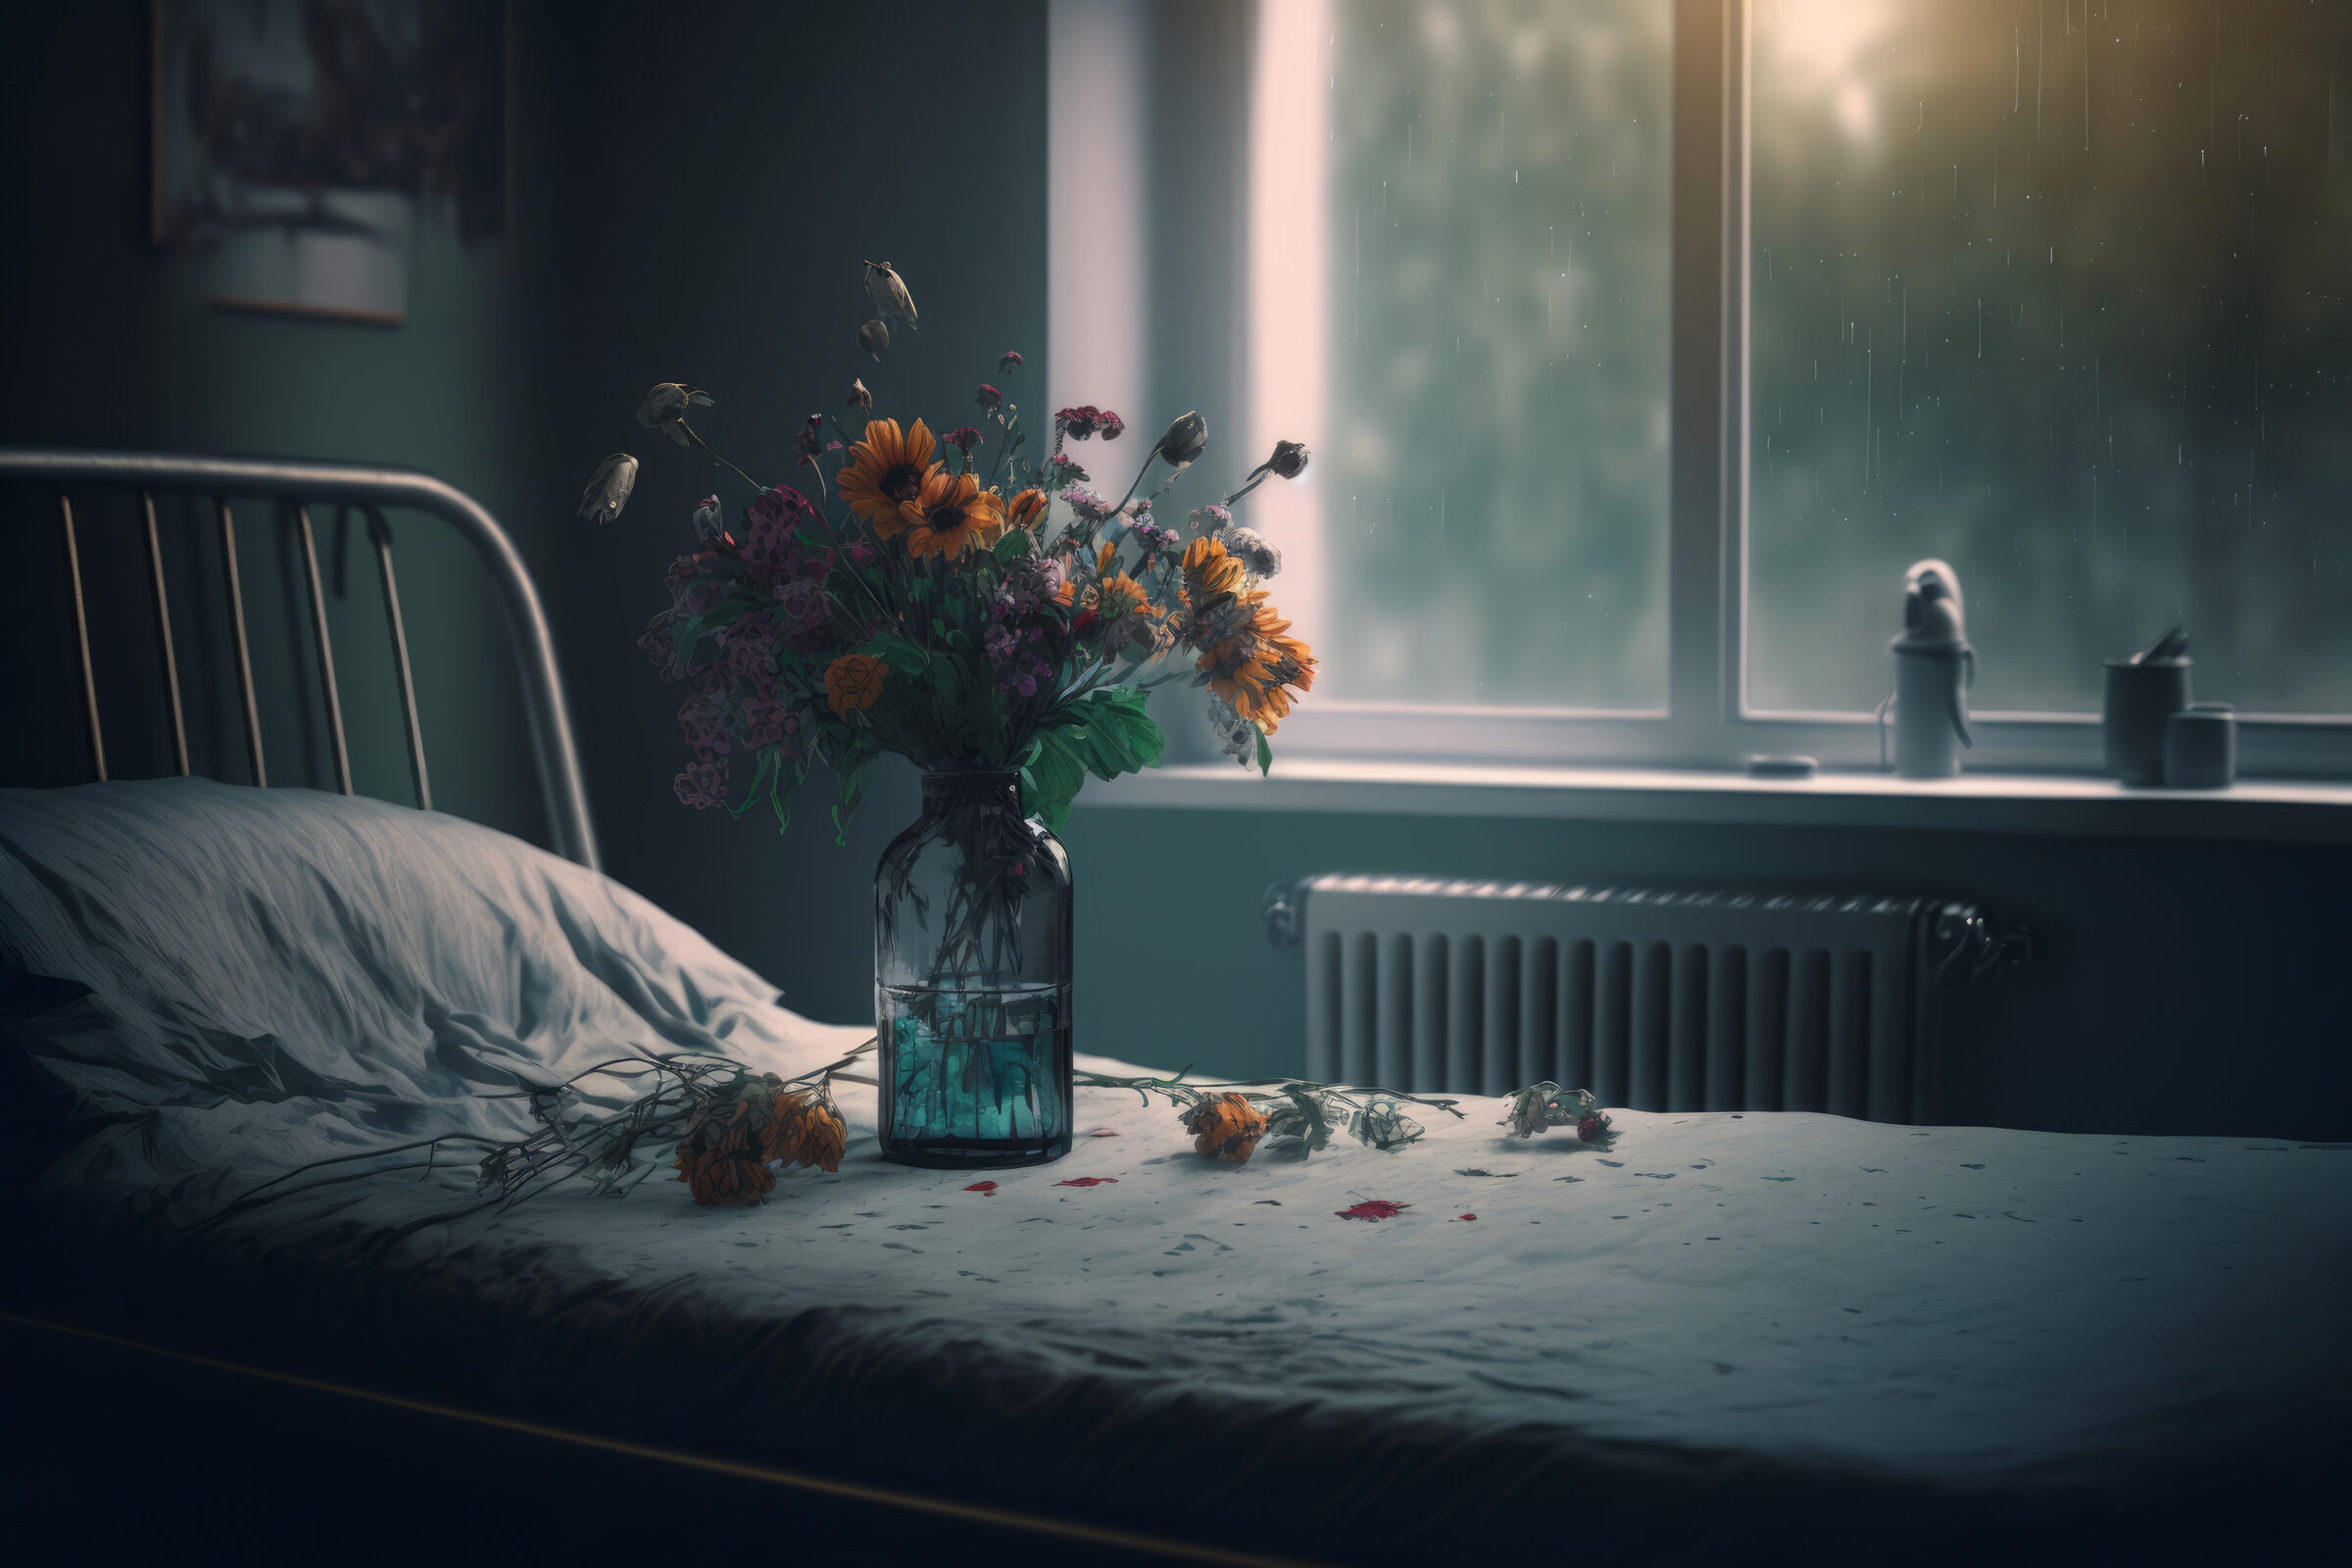 An empty hospital bed with dying flowers.